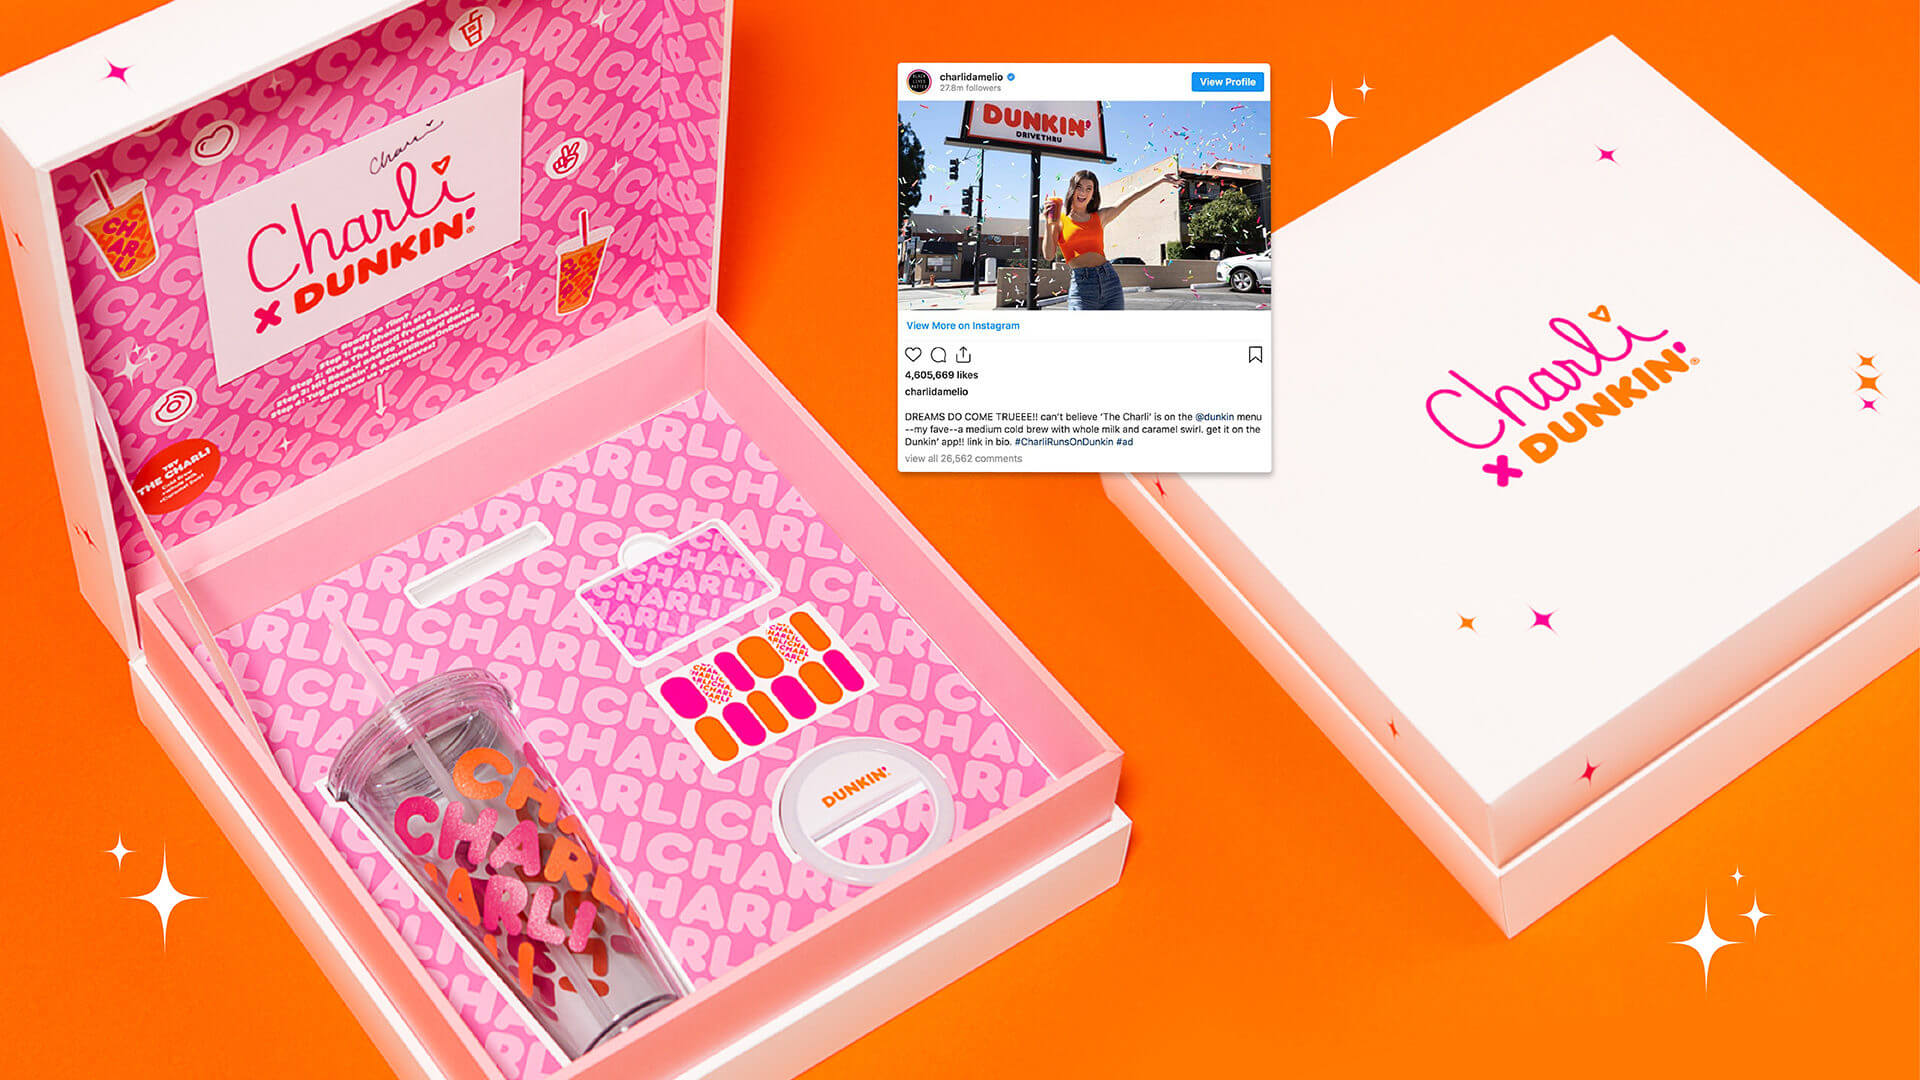 Collage showing Dunkin collaboration with Charli D'Amelio